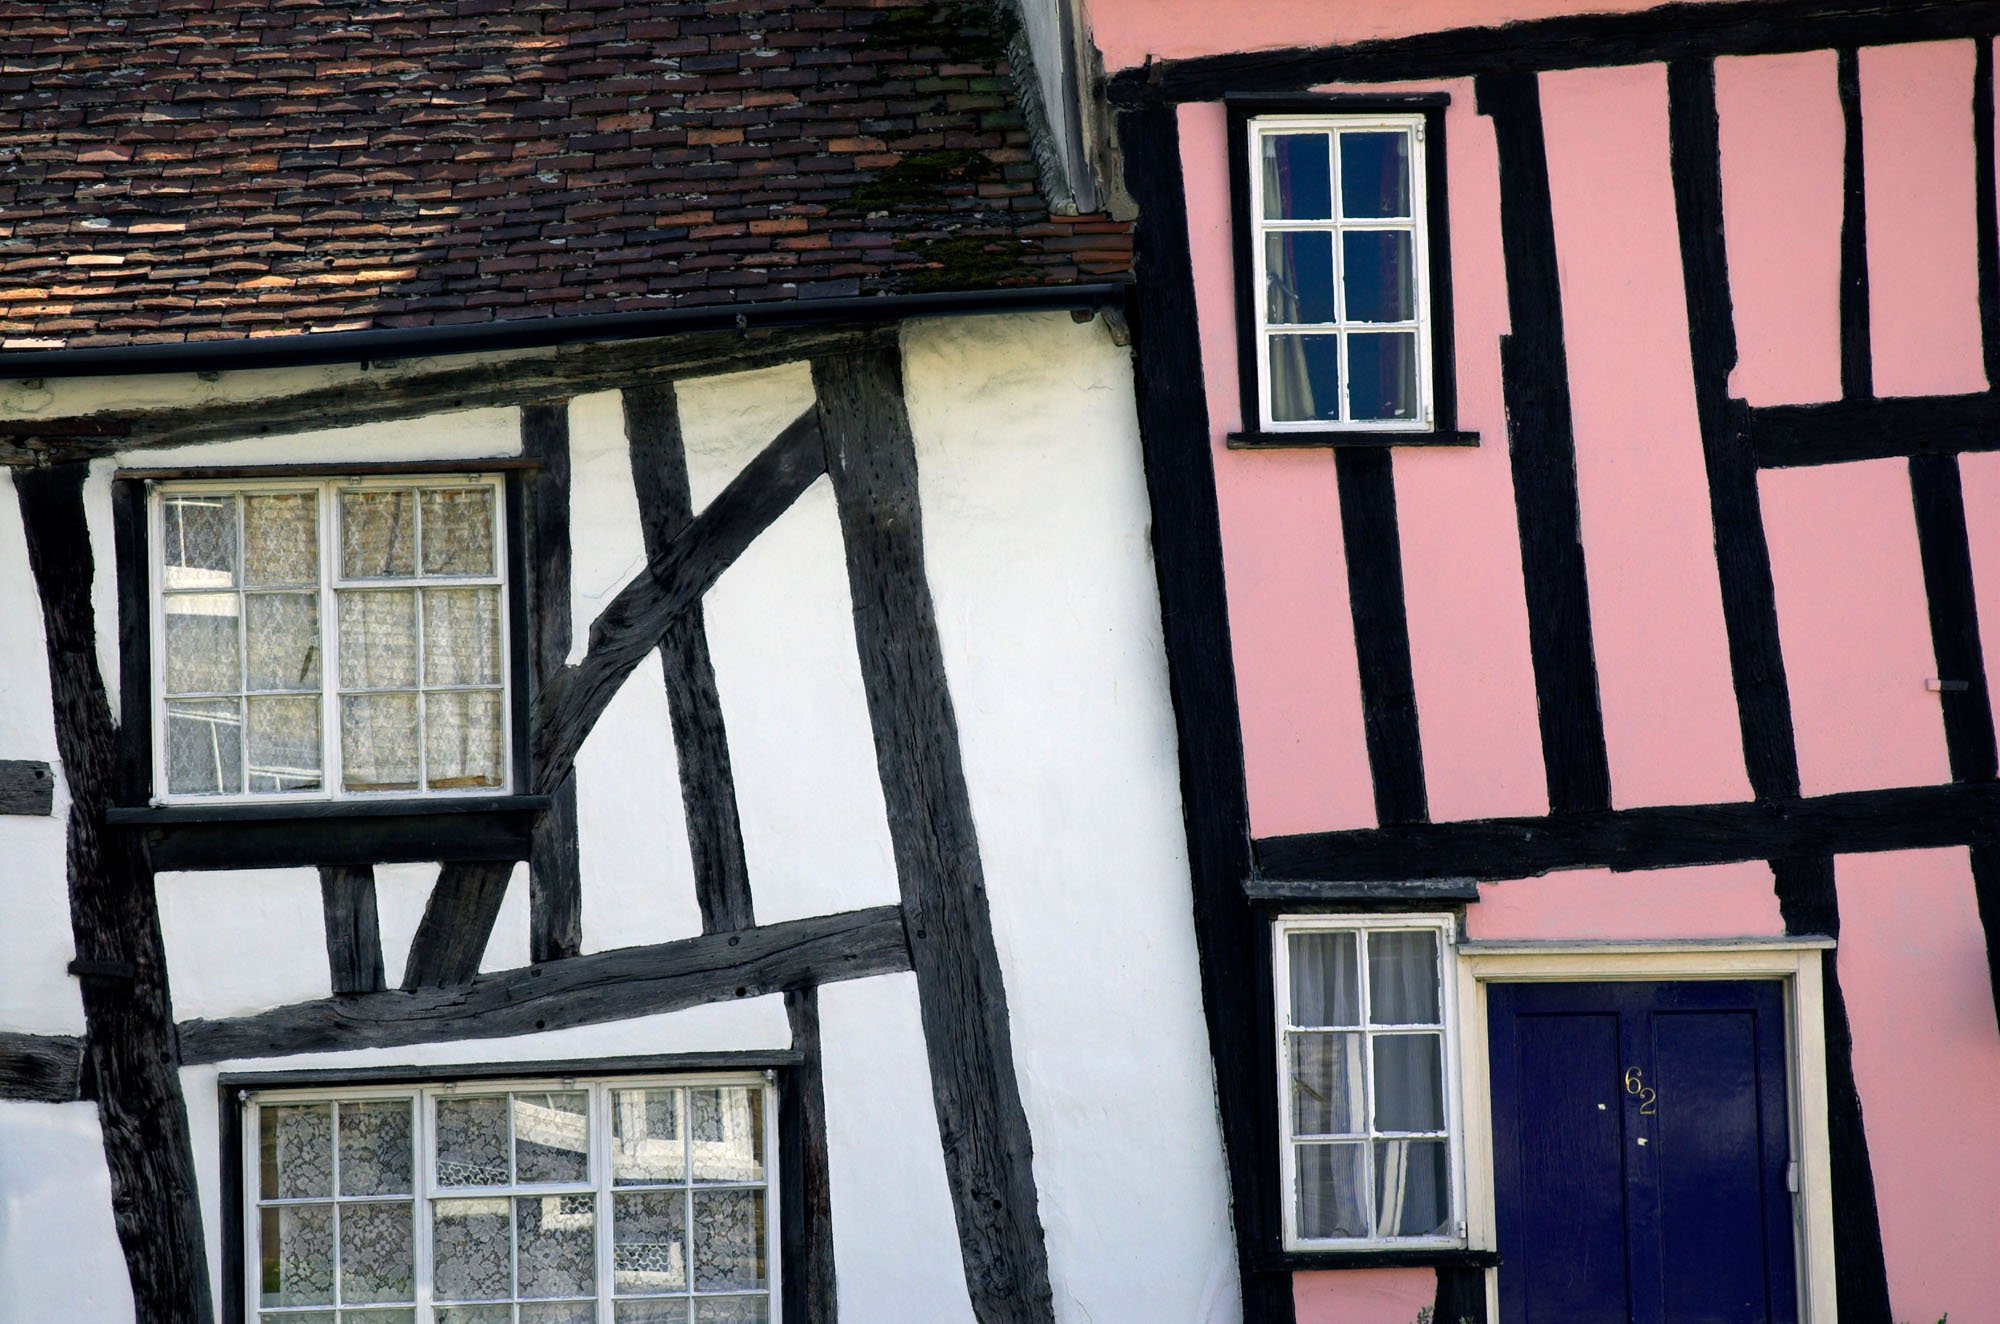 Detail of crooked timber-framed houses.